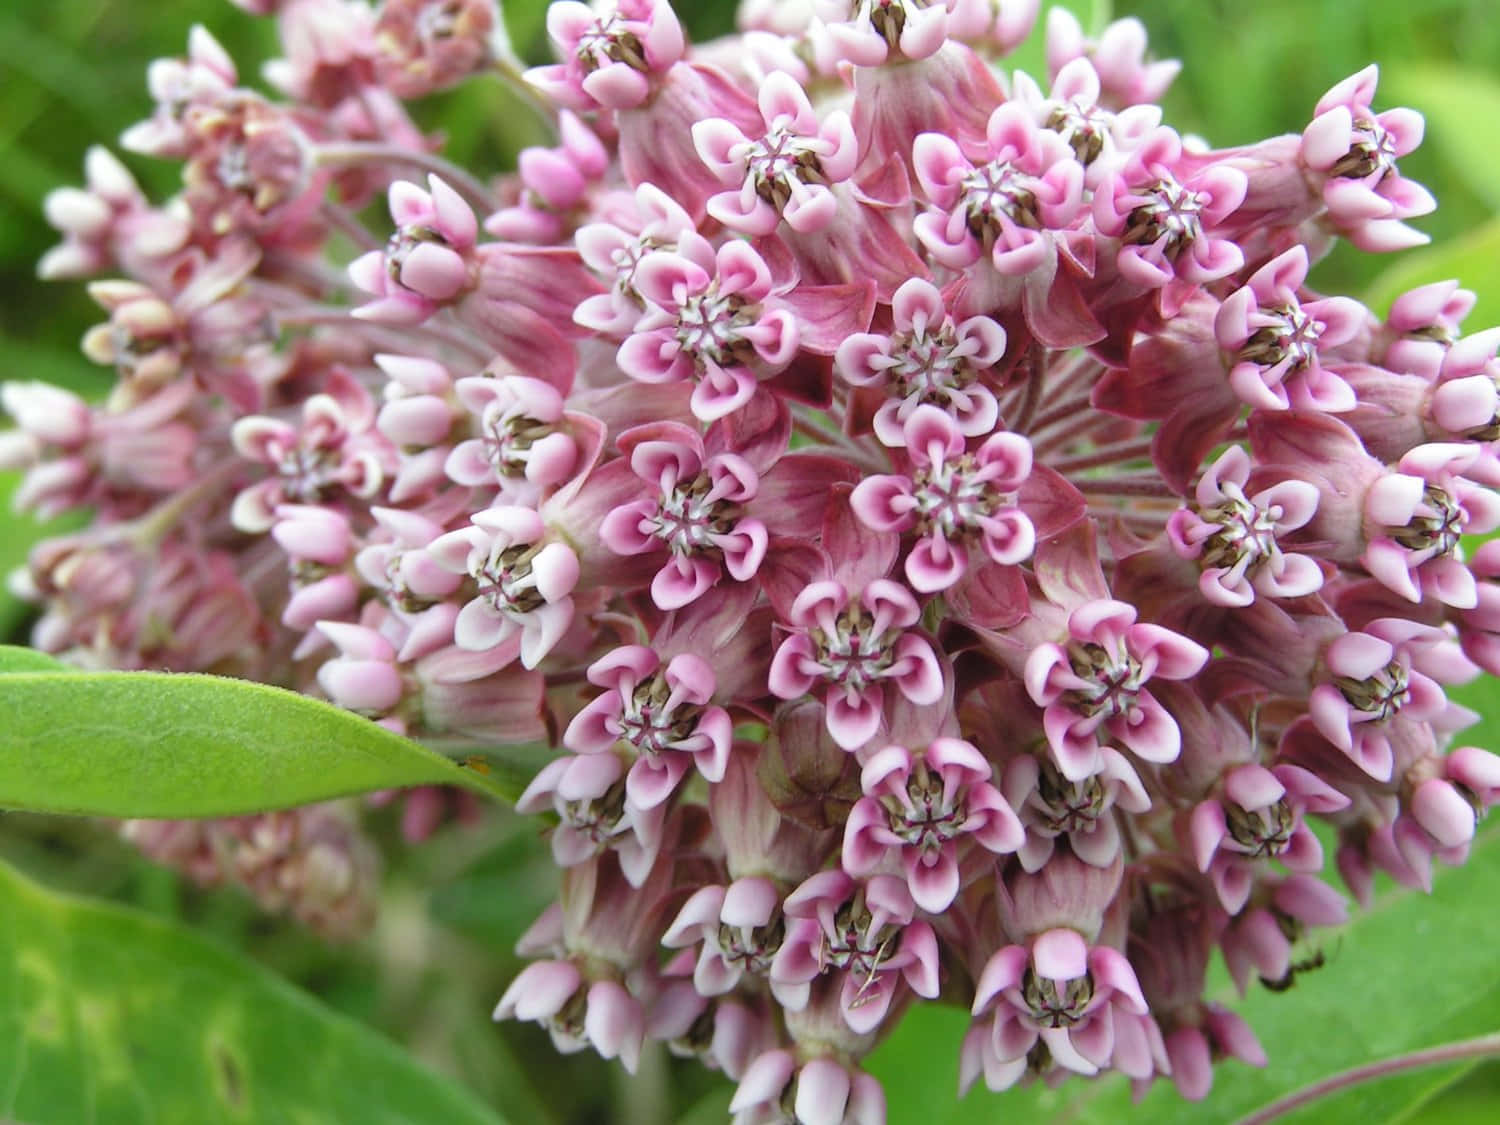 "See the beauty of Milkweed blooming in nature."